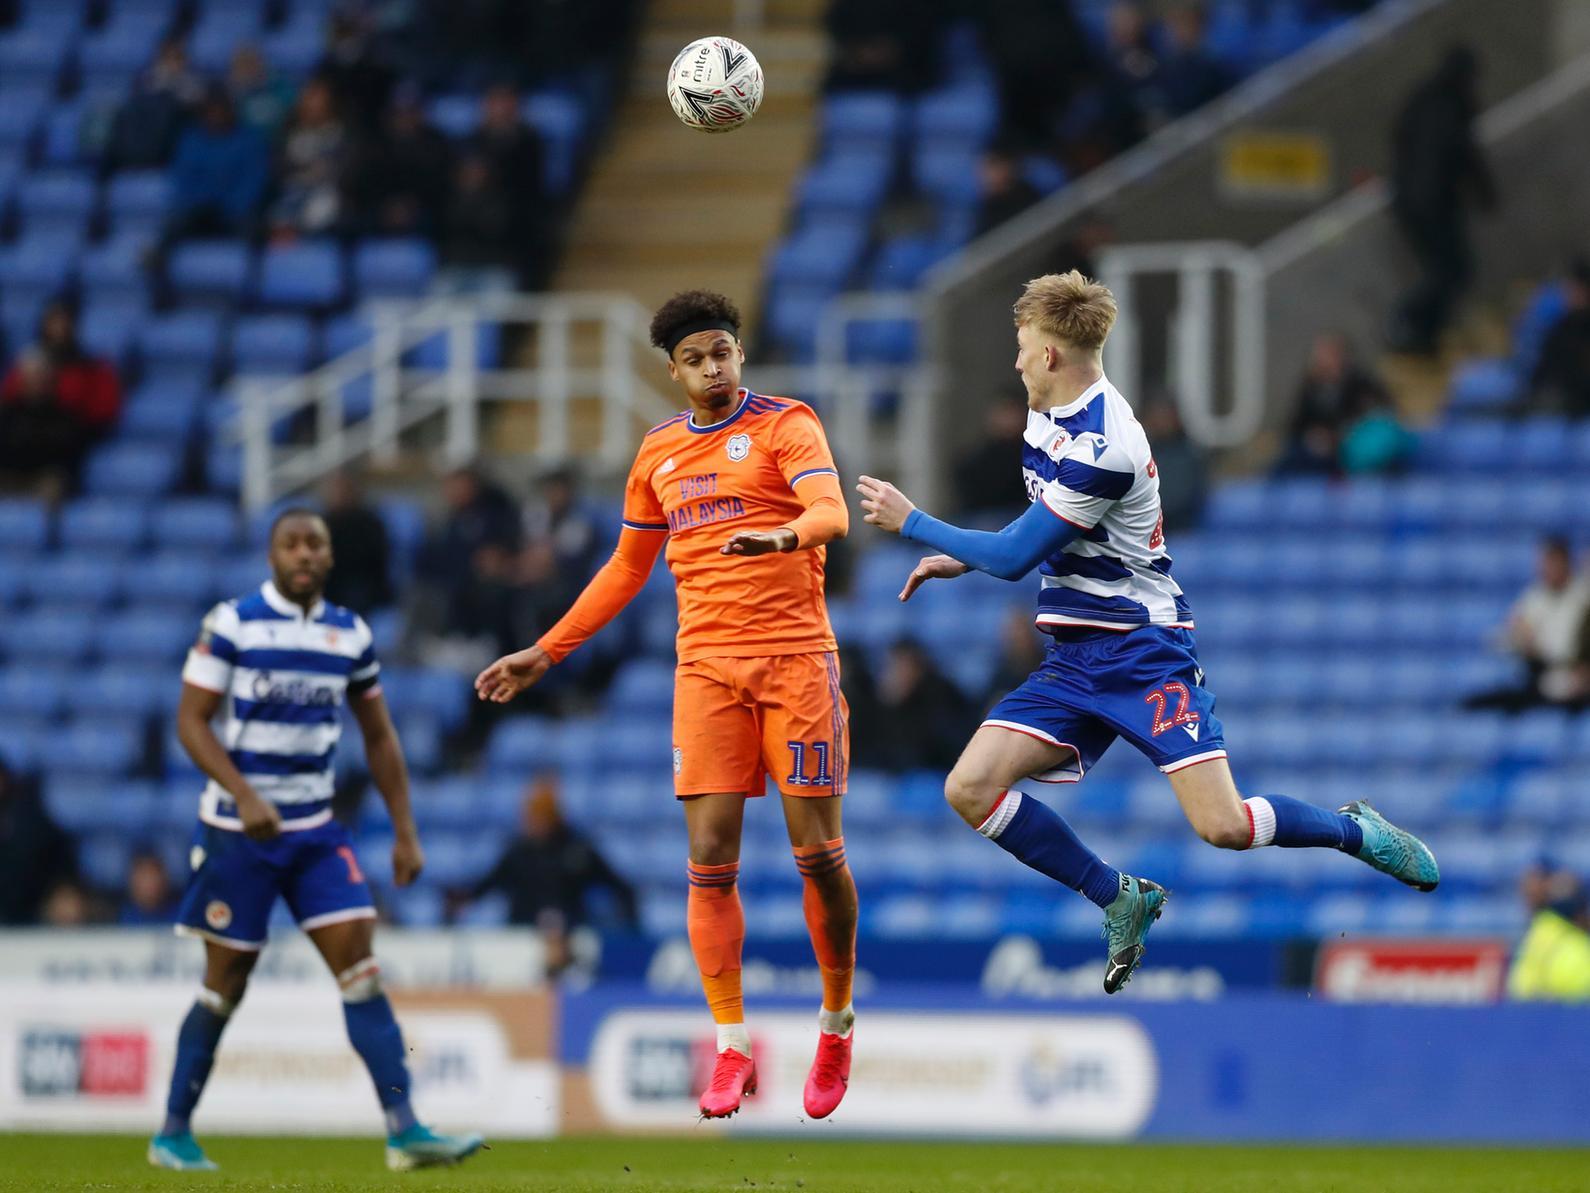 Blackpool have been linked with a move for Reading right-back Teddy Howe, which The Gazette understands could well go through today.